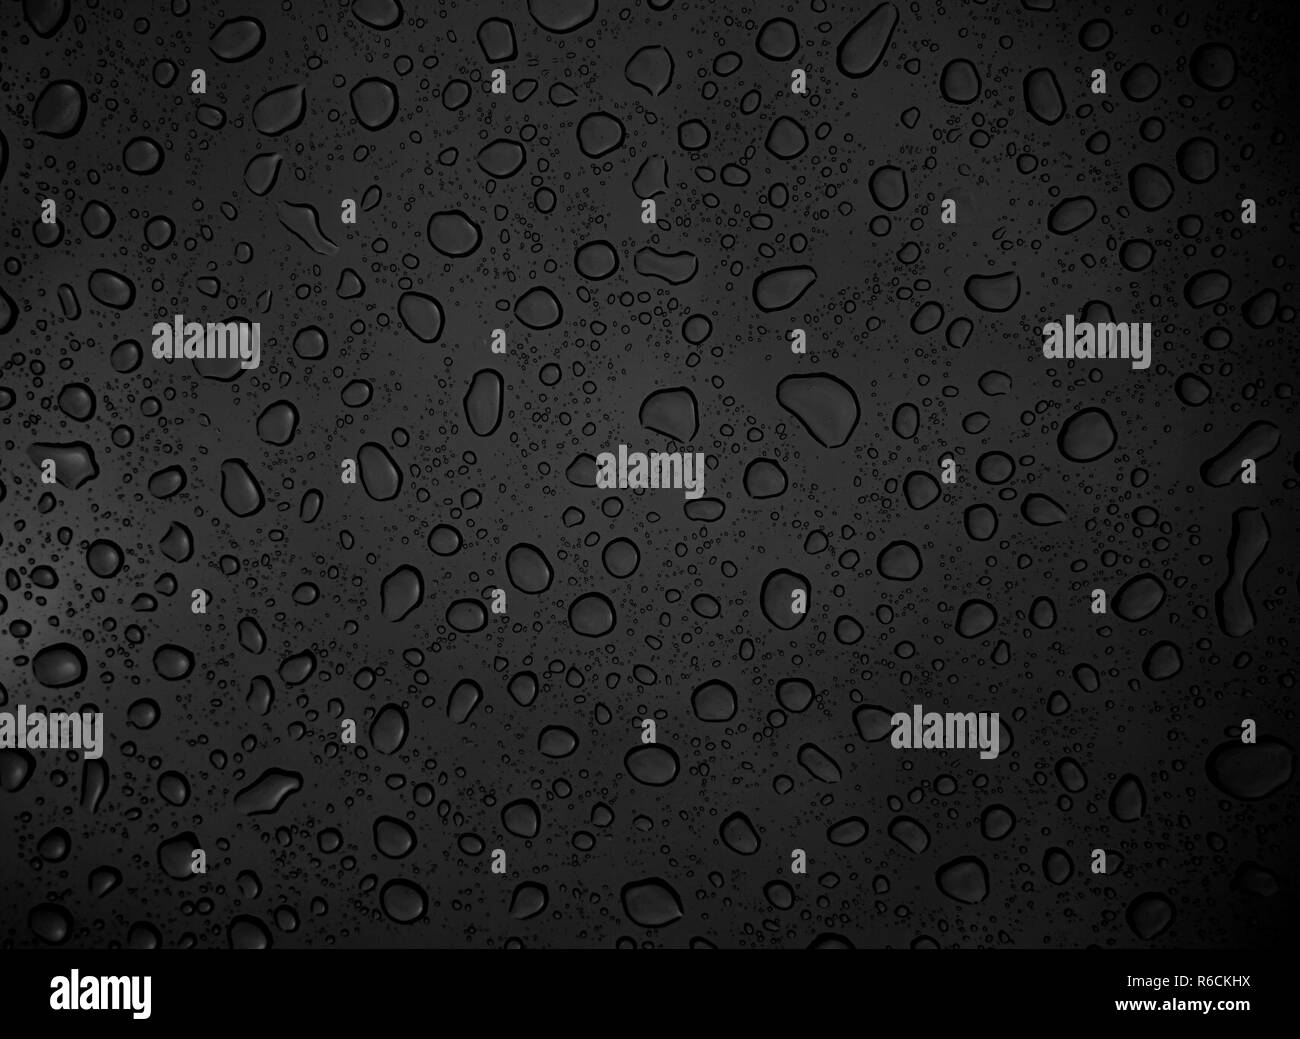 black background with water drops Stock Photo